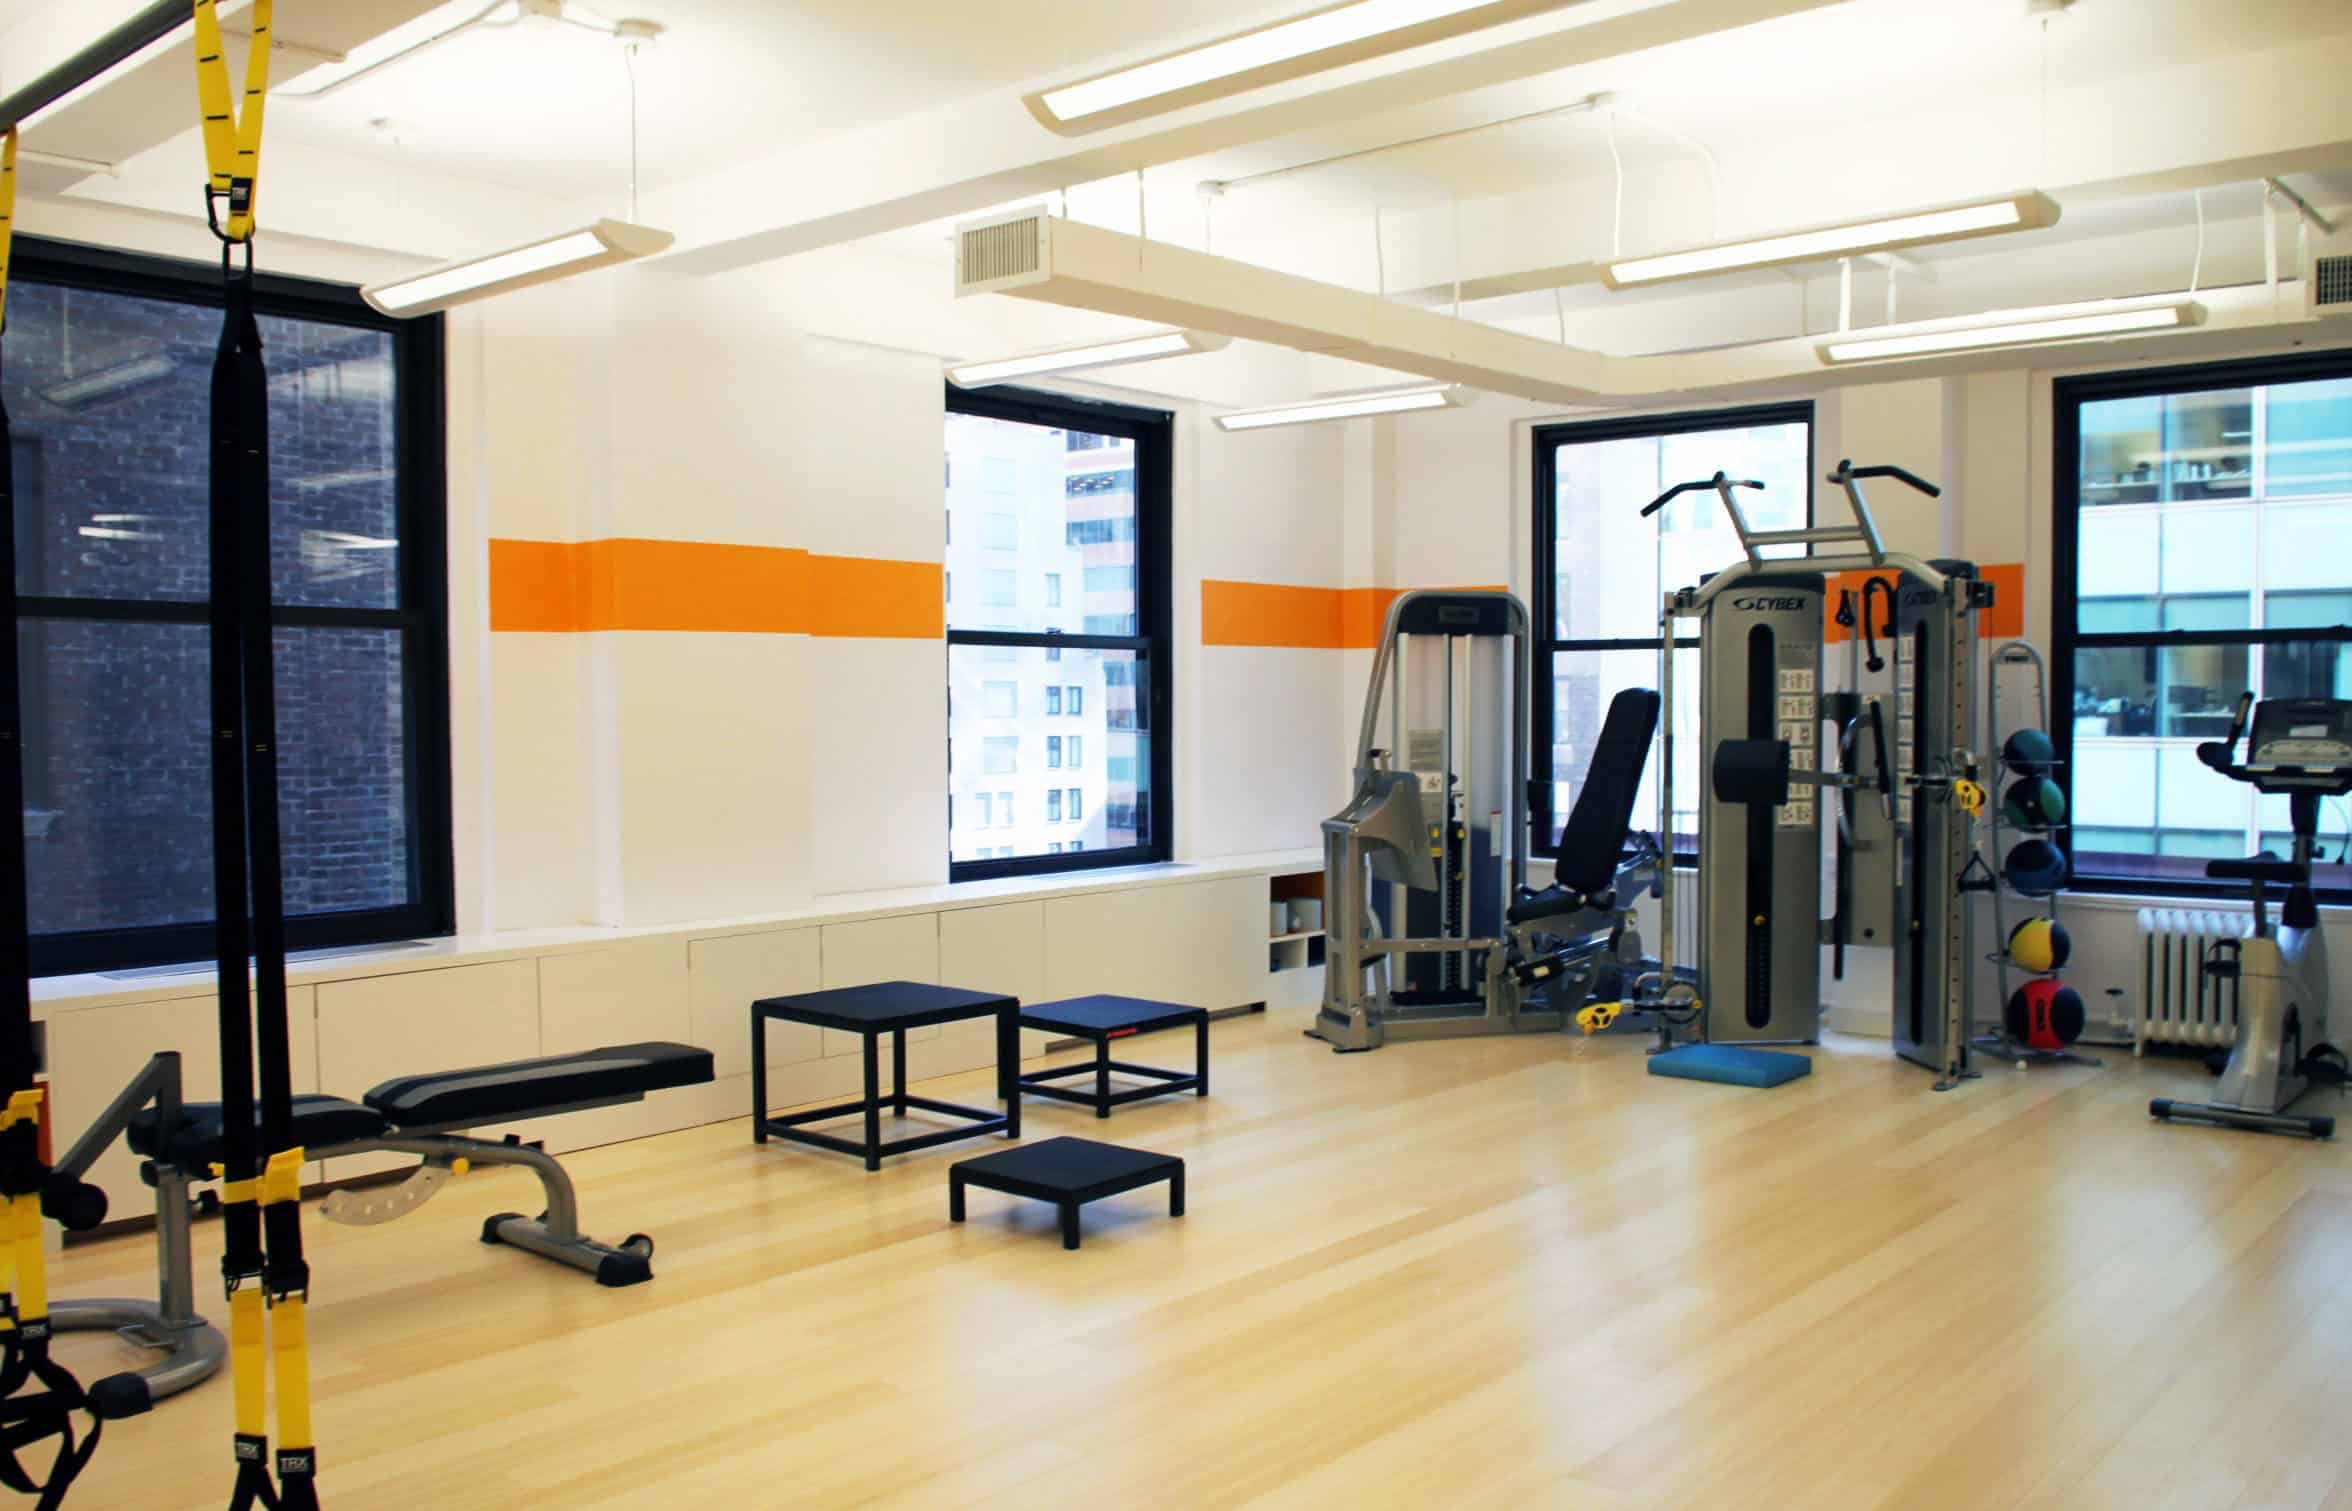 Gym space in commercial office renovation by EXD Architecture